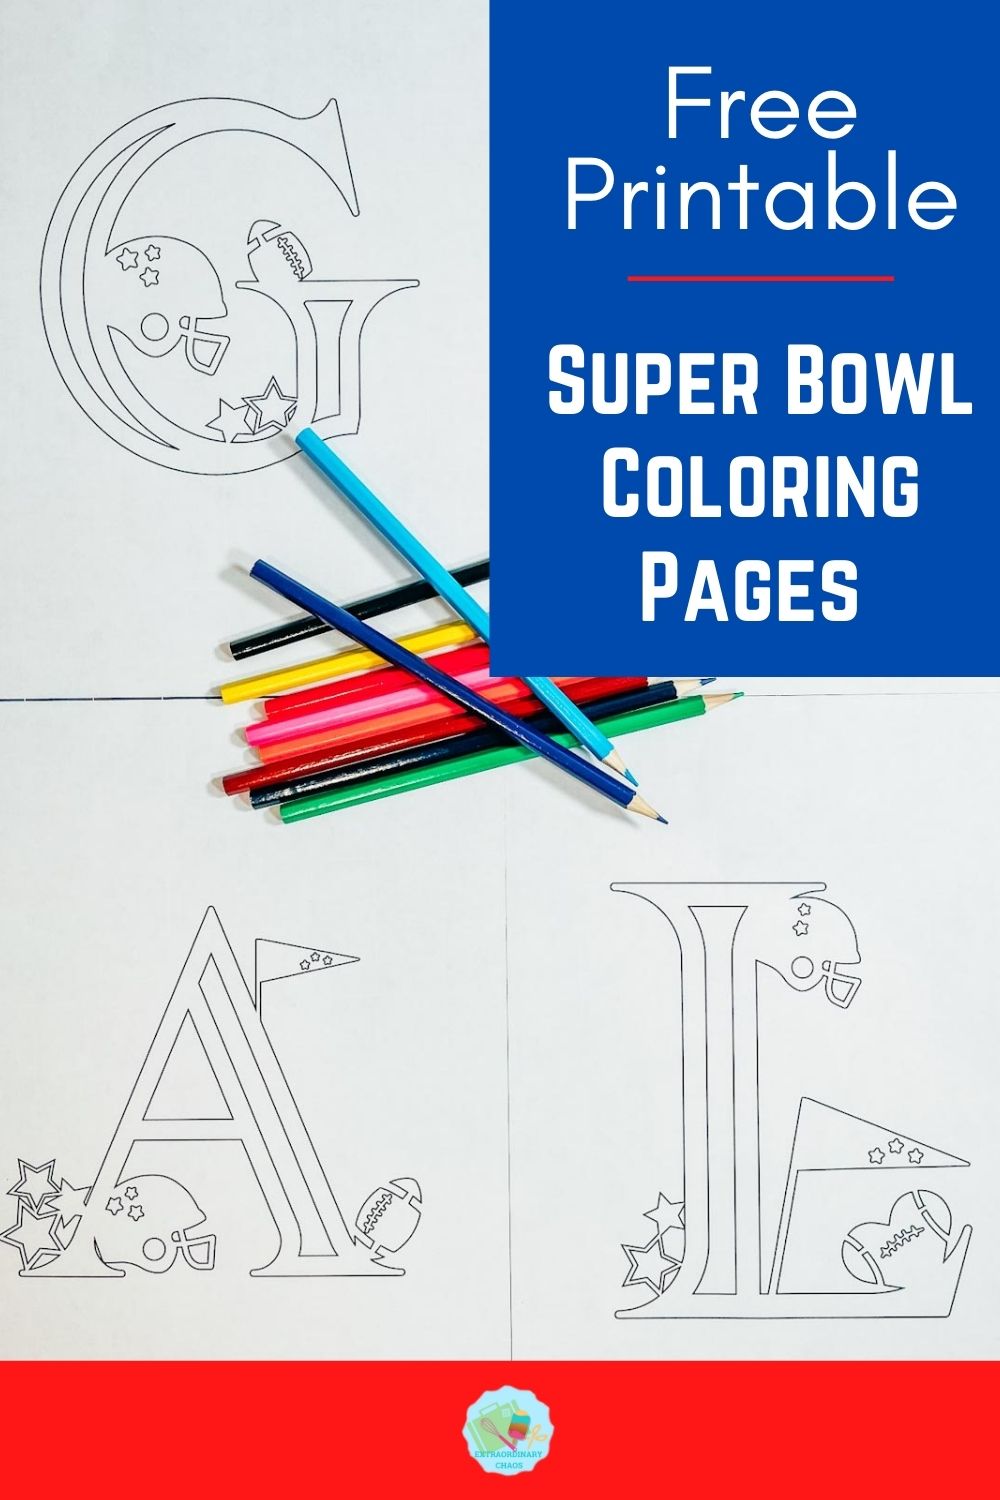 Free printable super bowl coloring pages abc â extraordinary chaos